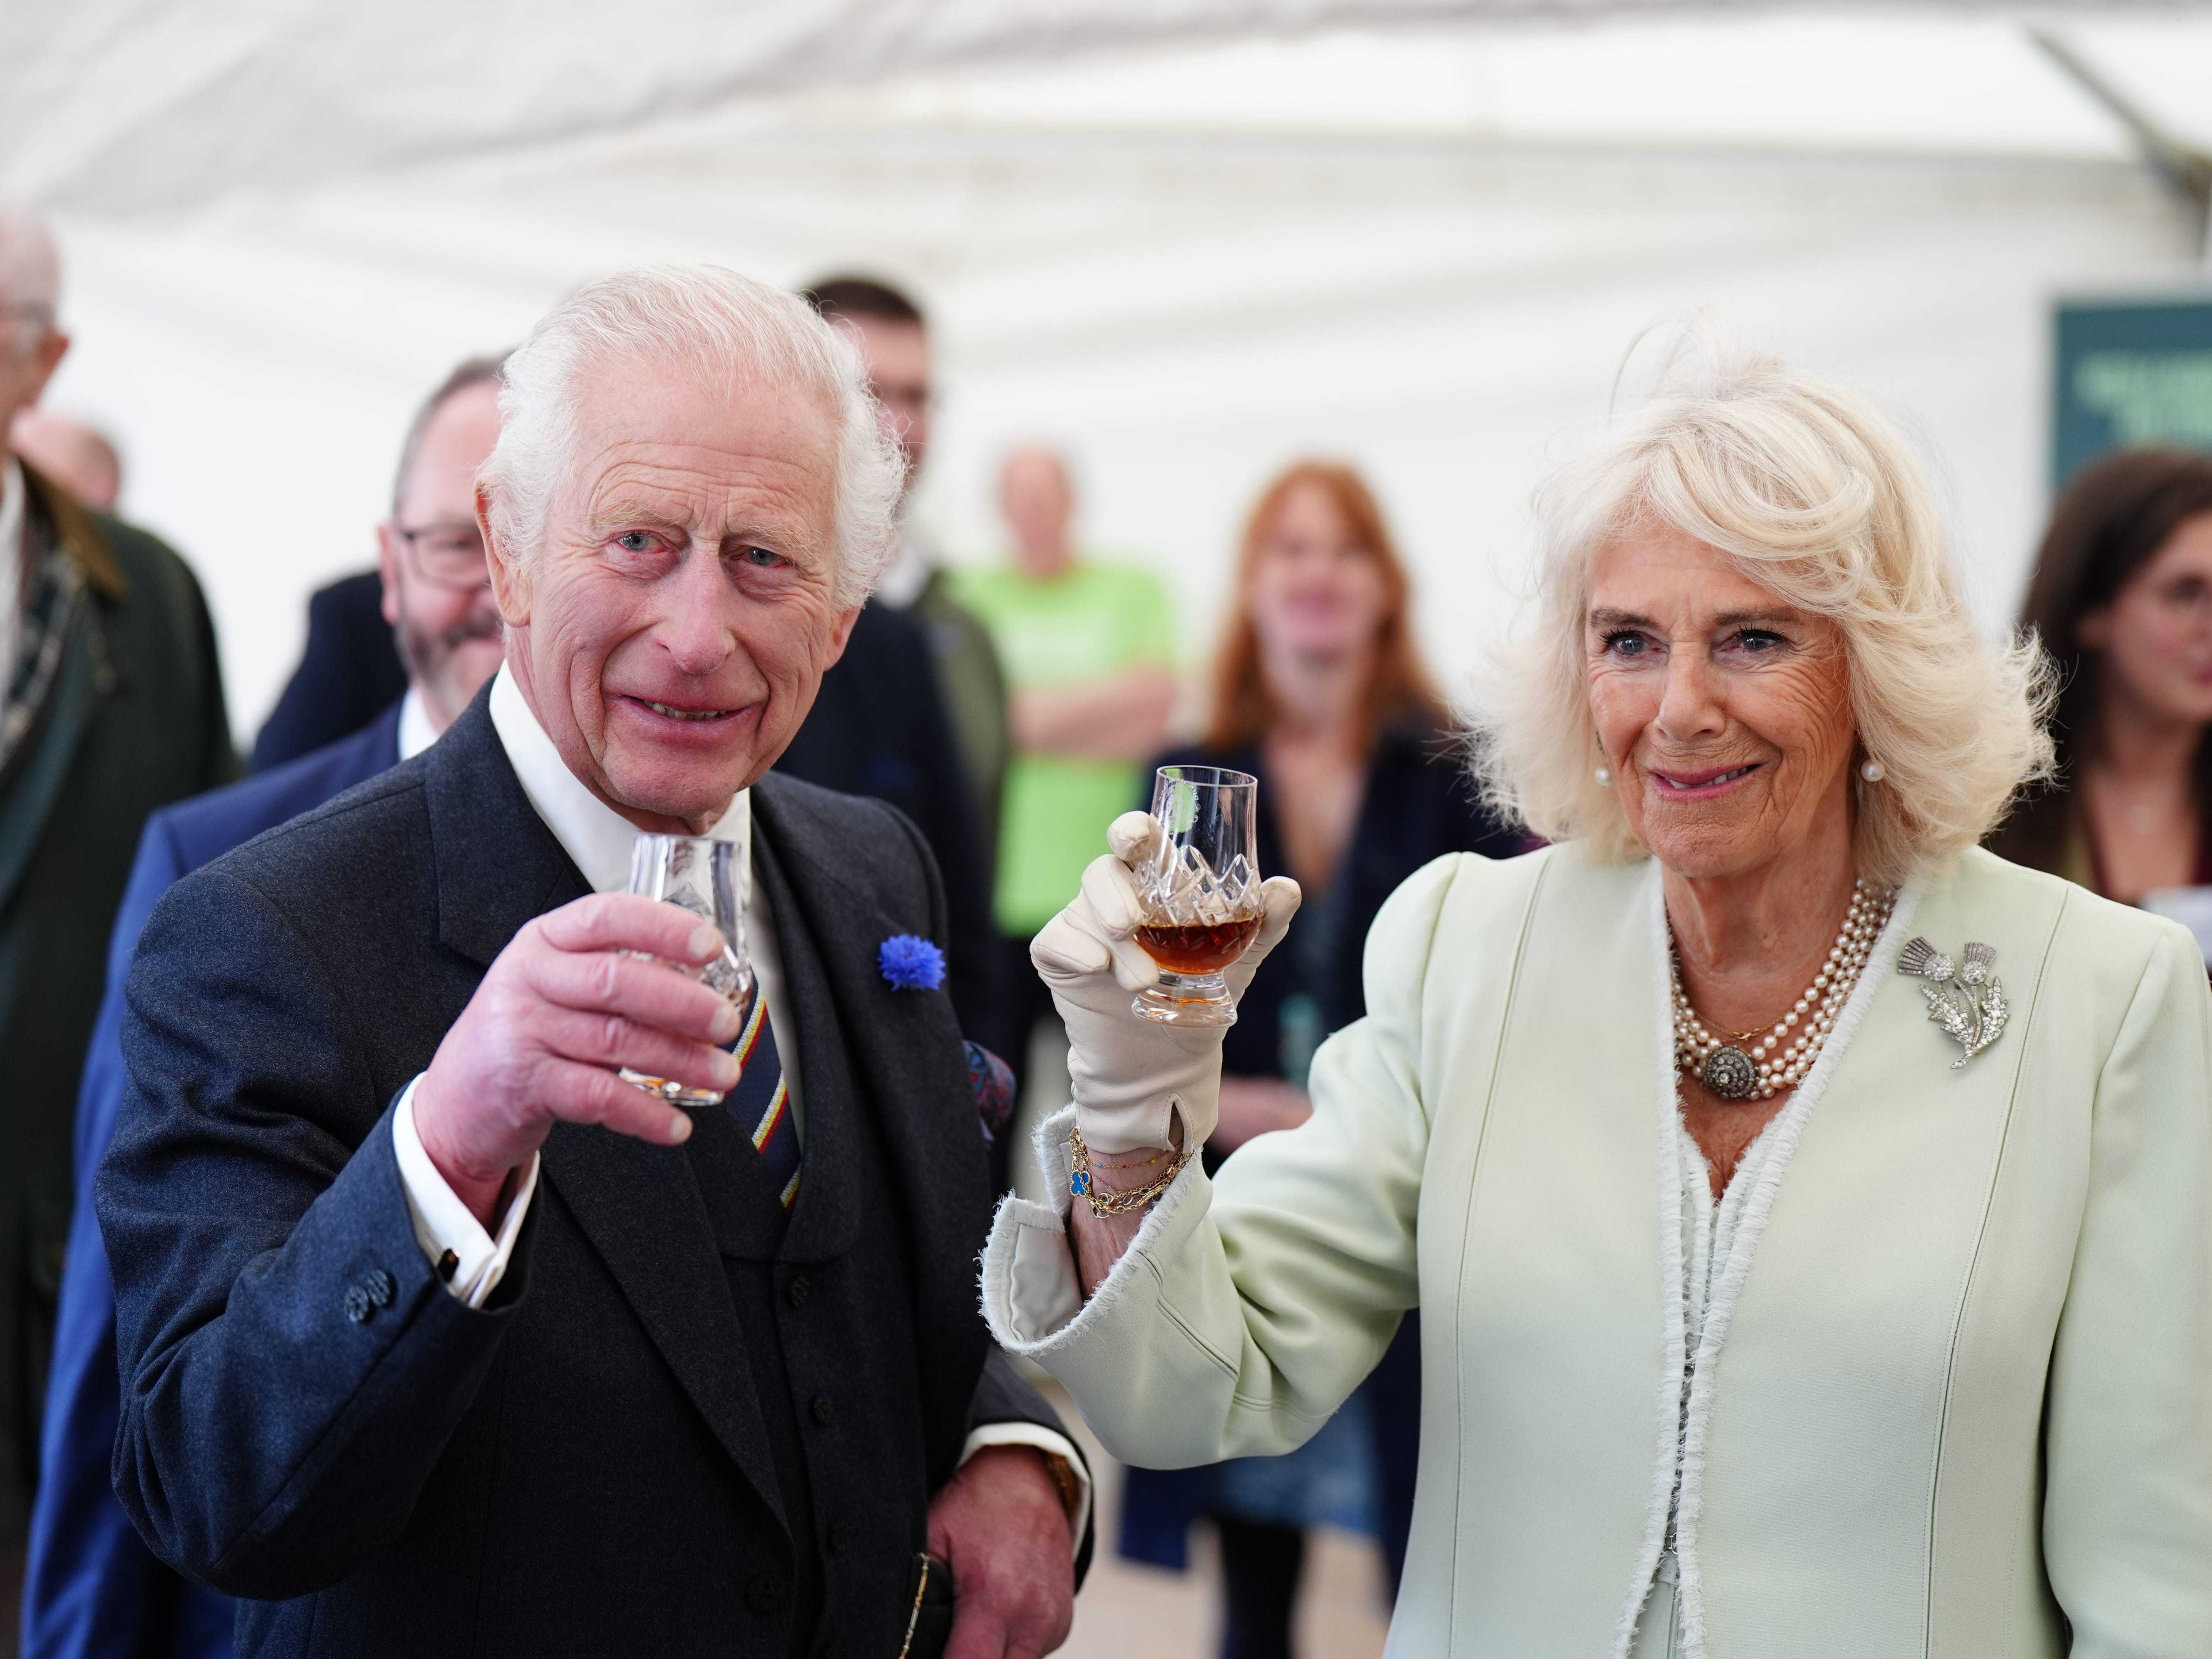 ‘That hit the spot’: King and Queen enjoy vintage whisky at Edinburgh event